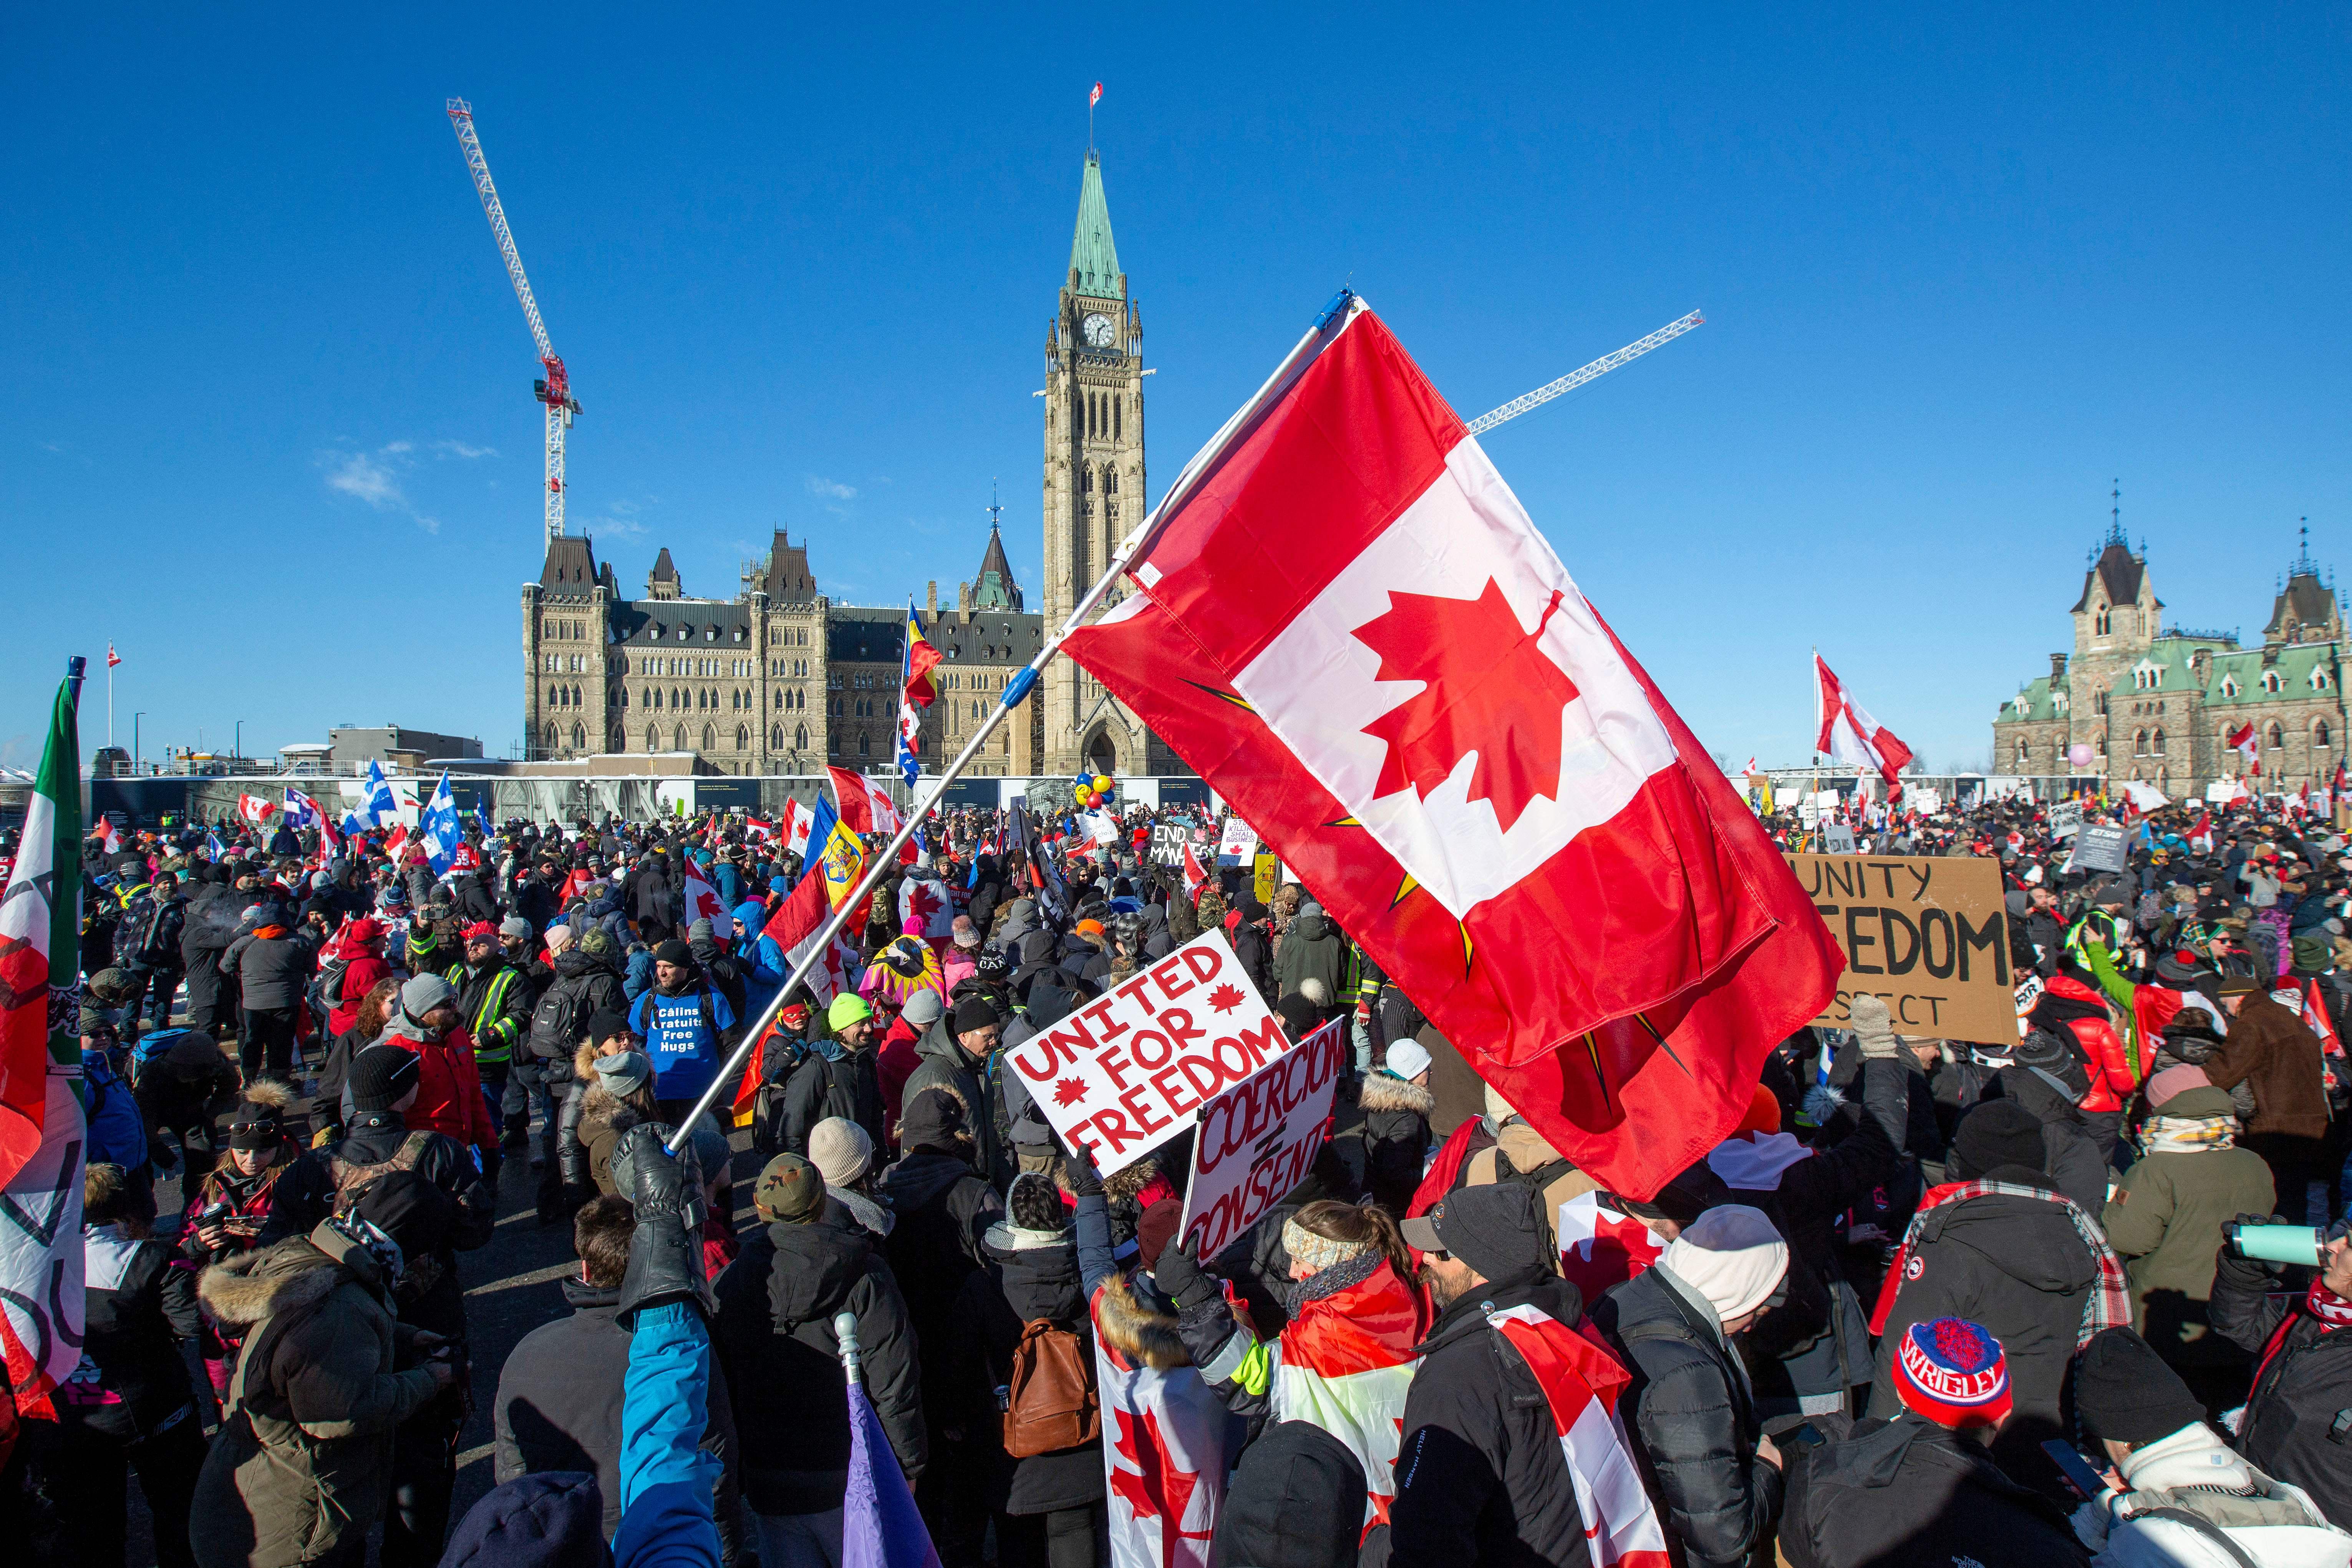 Supporters arrive at Parliament Hill for the Freedom Truck Convoy to protest against Covid-19 vaccine mandates and restrictions in Ottawa, Canada, on January 29, 2022. 